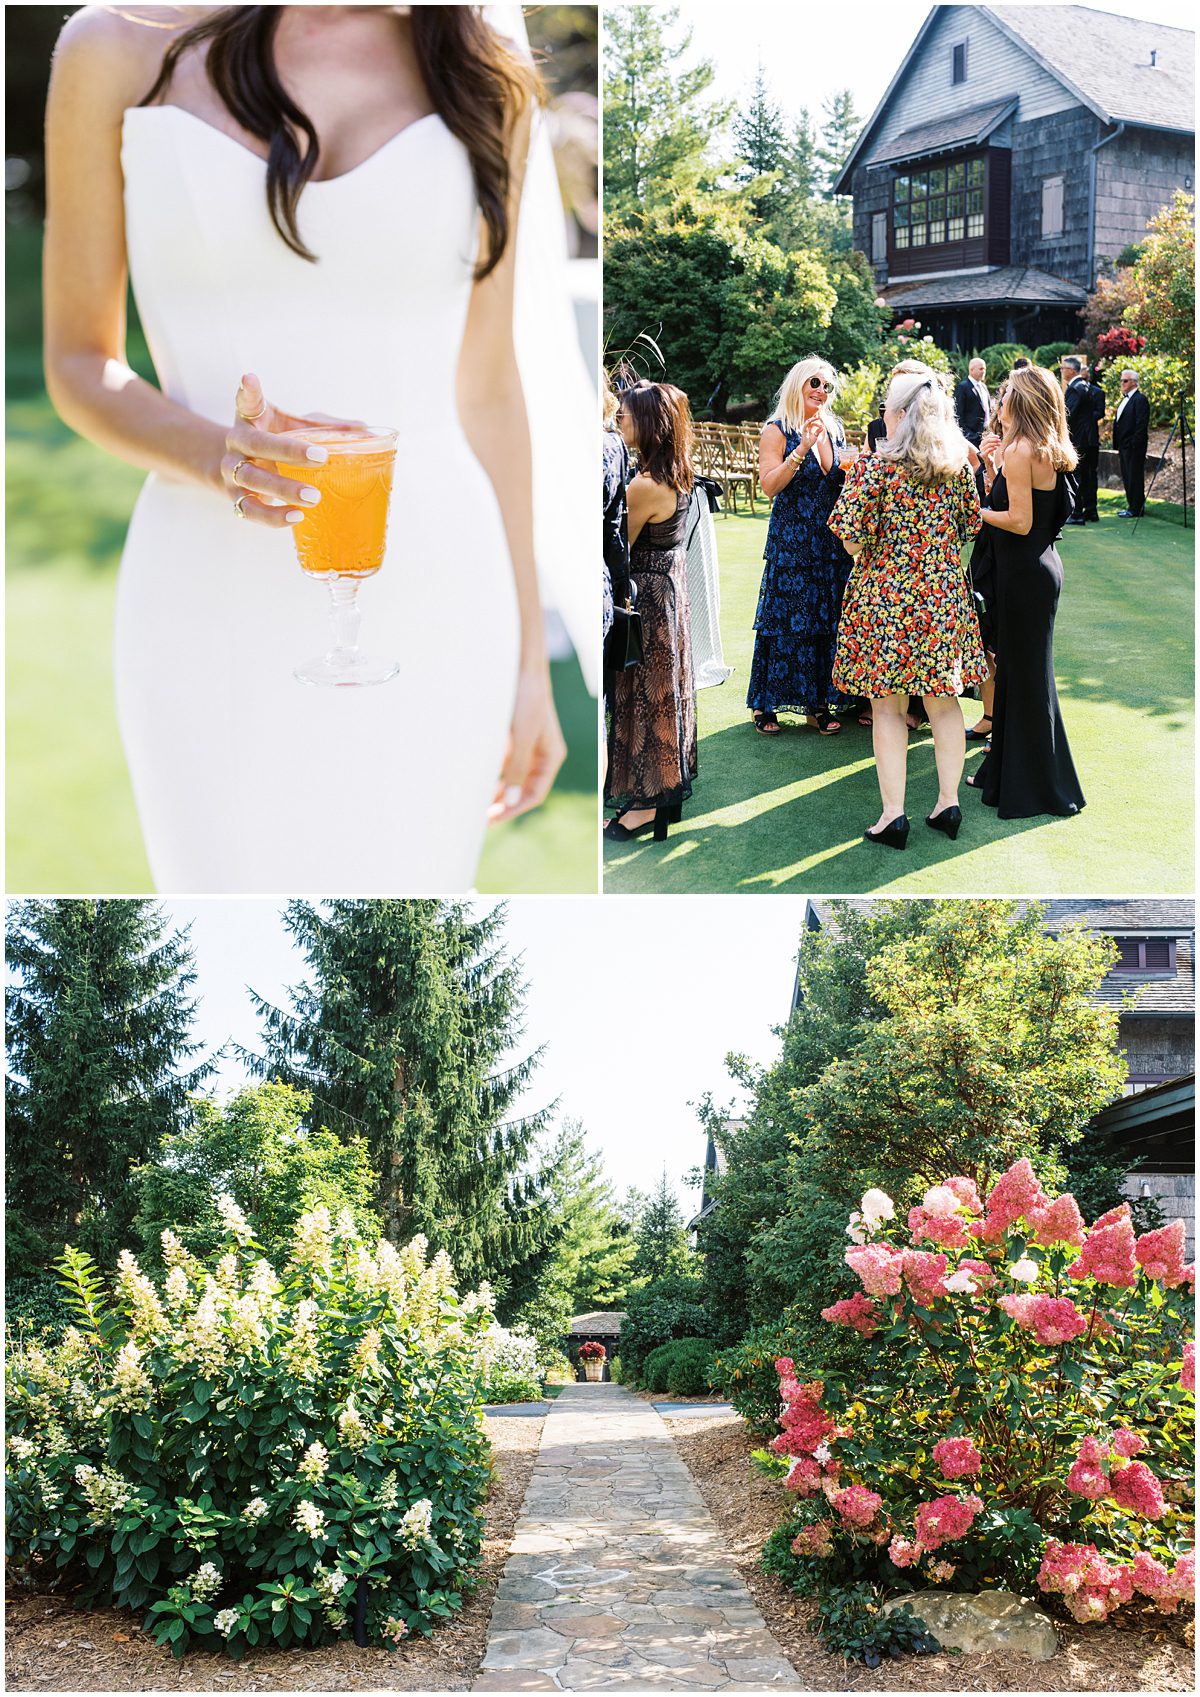 Guests socializing and enjoying signature drinks at Mountaintop Golf and Lake Club before the wedding ceremony